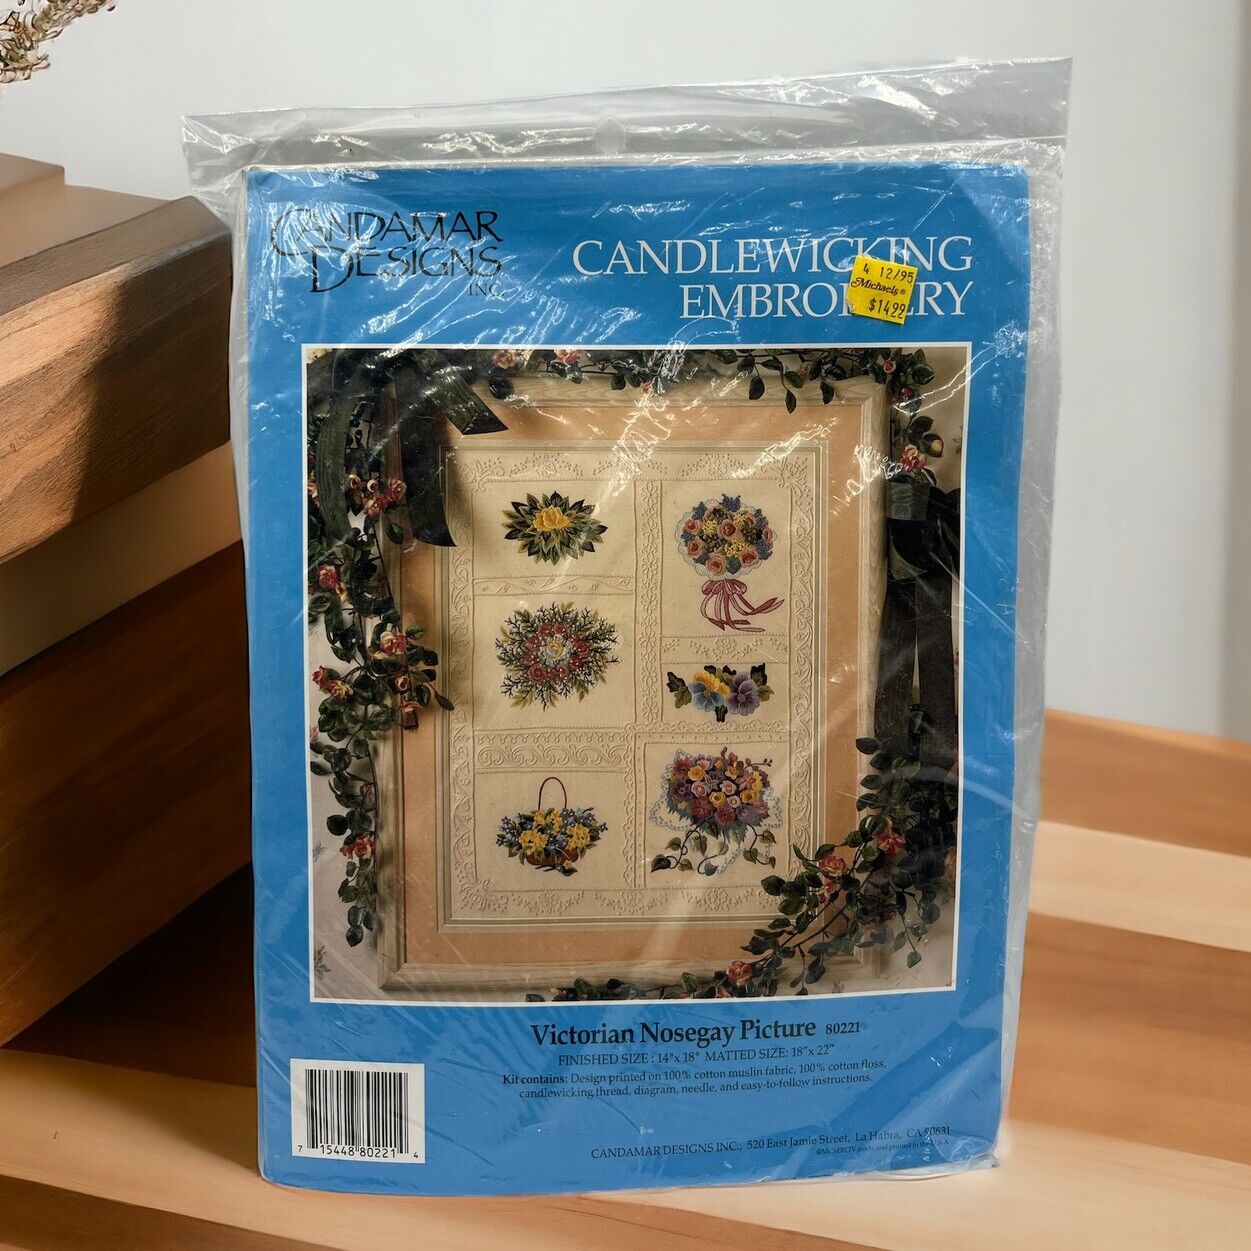 Victorian Nosegay Picture Candamar Designs Candlewicking/Embroidery #80221 NIP